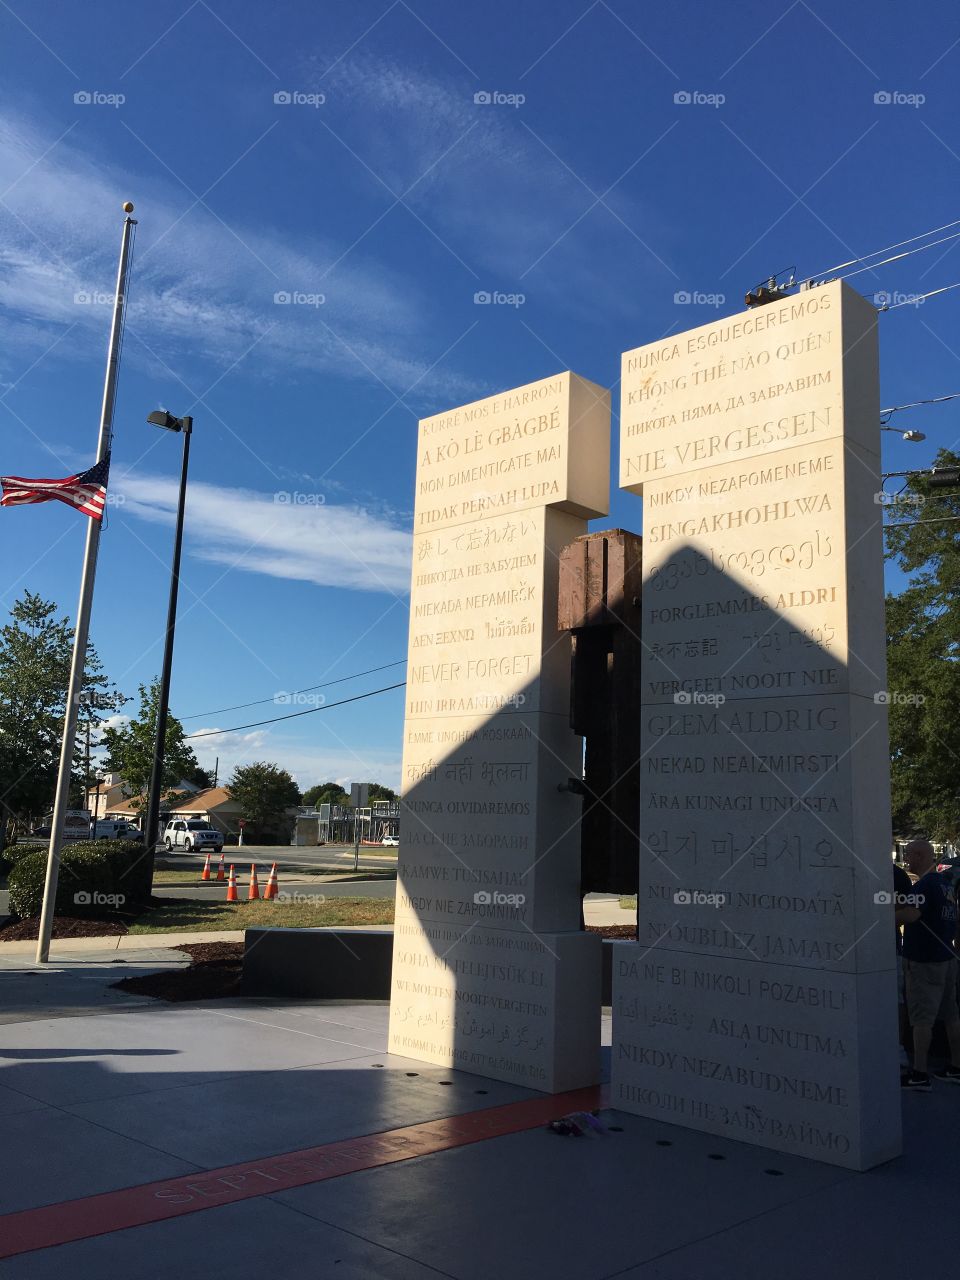 We will never forget. 9/11 memorial in NC